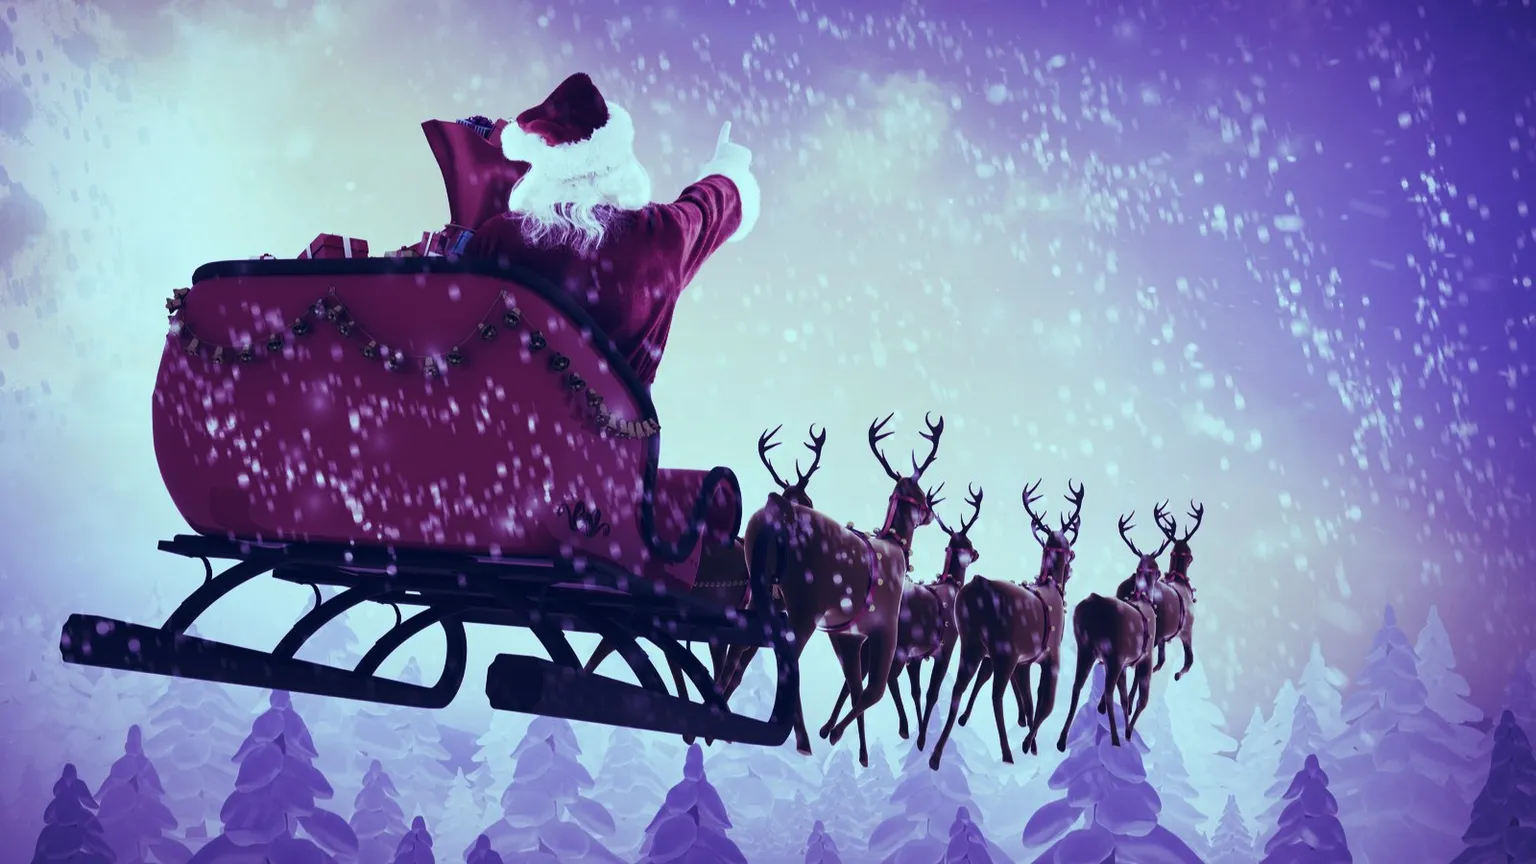 Santa Claus riding on sleigh during Christmas against snow falling on fir tree forest. Image: Shutterstock